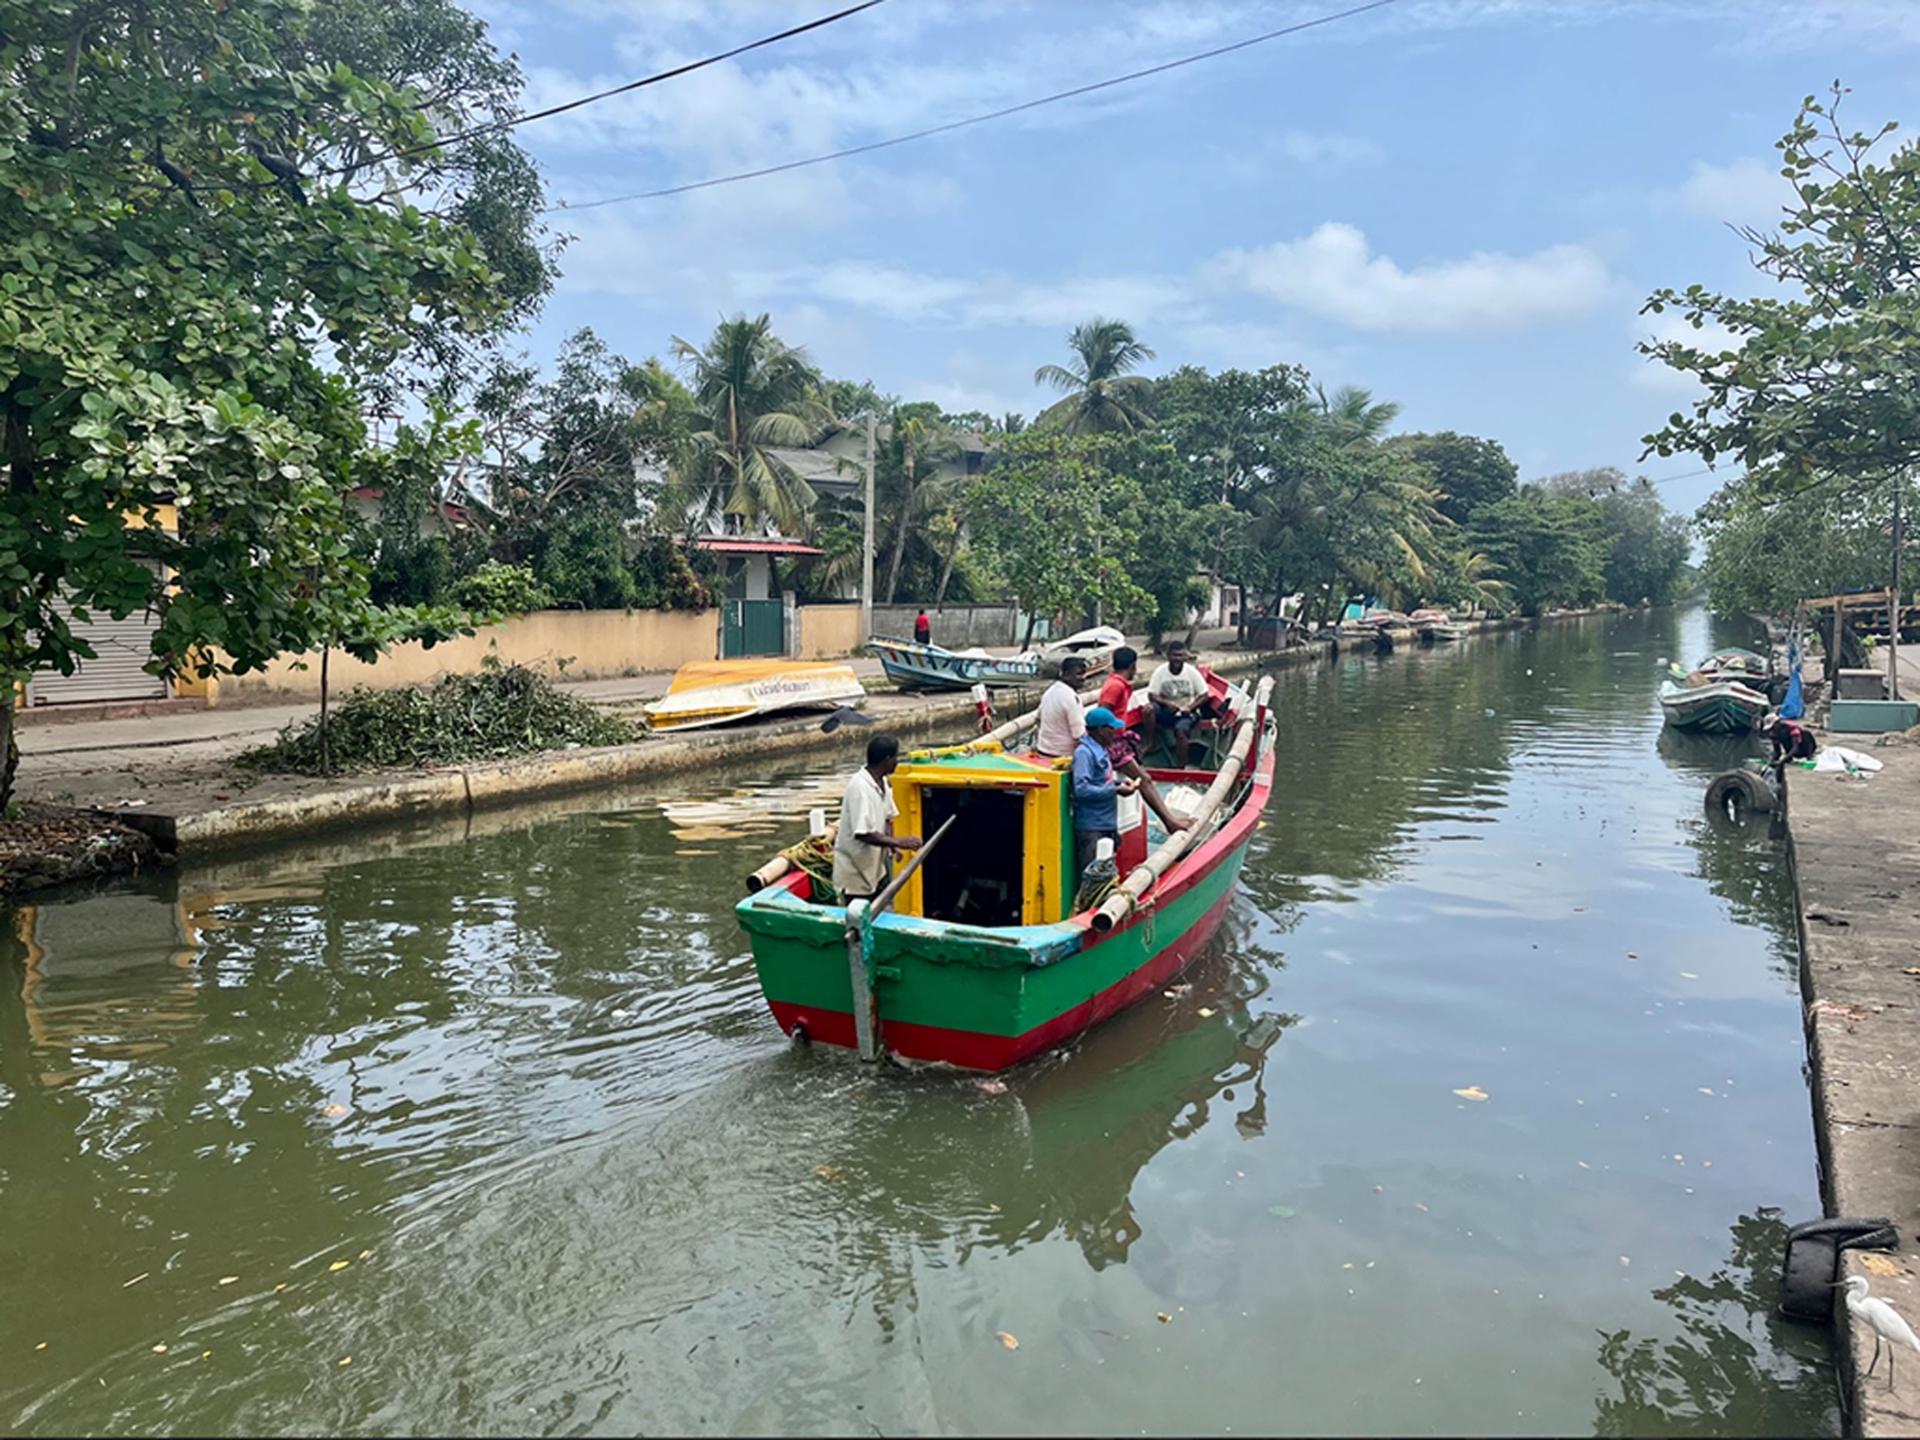 Fewer boats travel the canal, selling their catch to vendors in Sri Lanka.